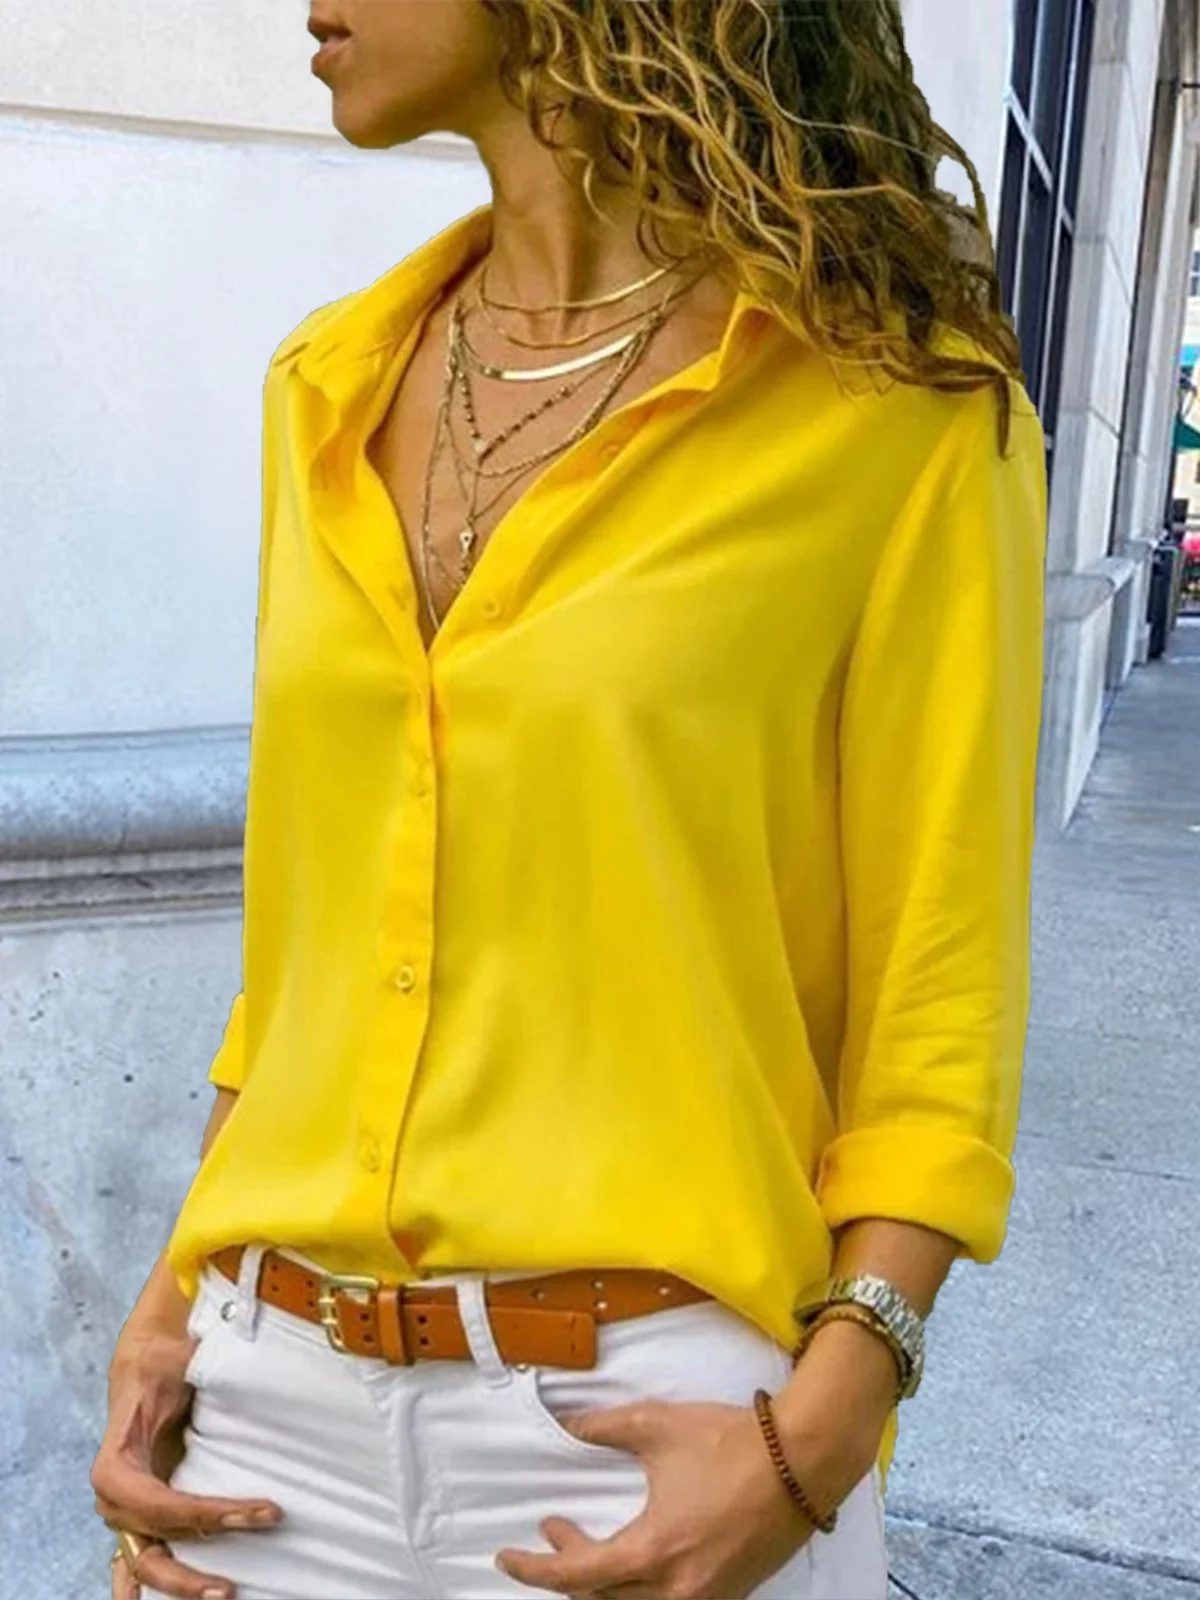 Solid Long Sleeve Casual Stand Collar Chiffon Blouse